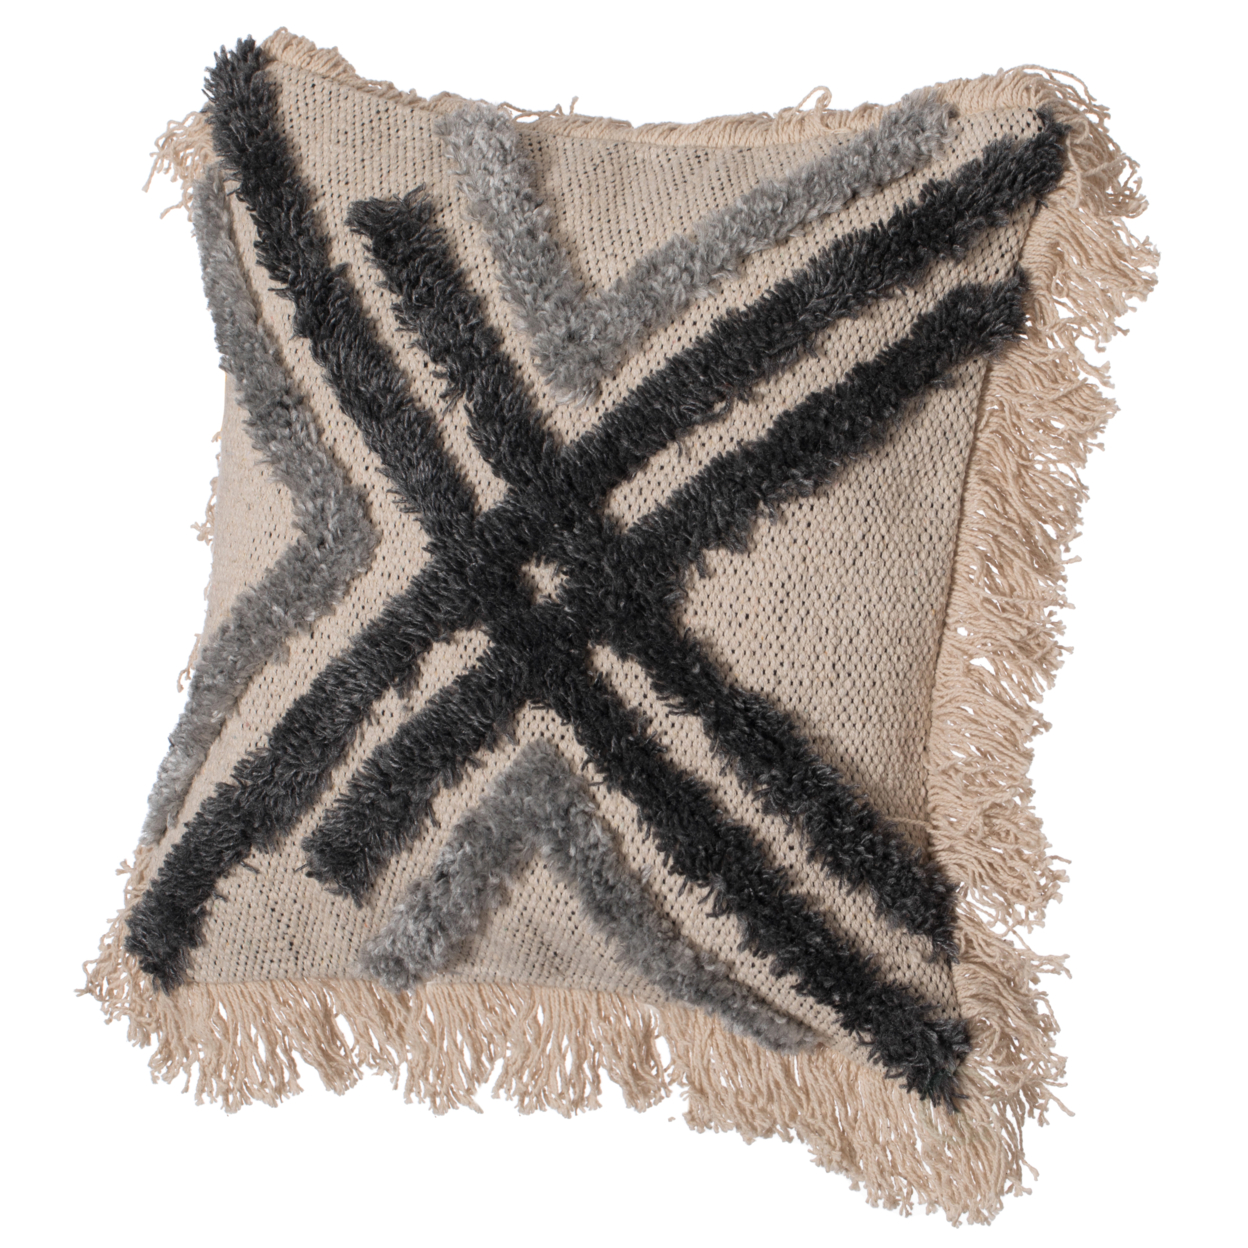 16 Handwoven Cotton & Silk Throw Fringed Pillow Cover Embossed Zig Zag & Crossed Lines Design - Crossed With Cushion